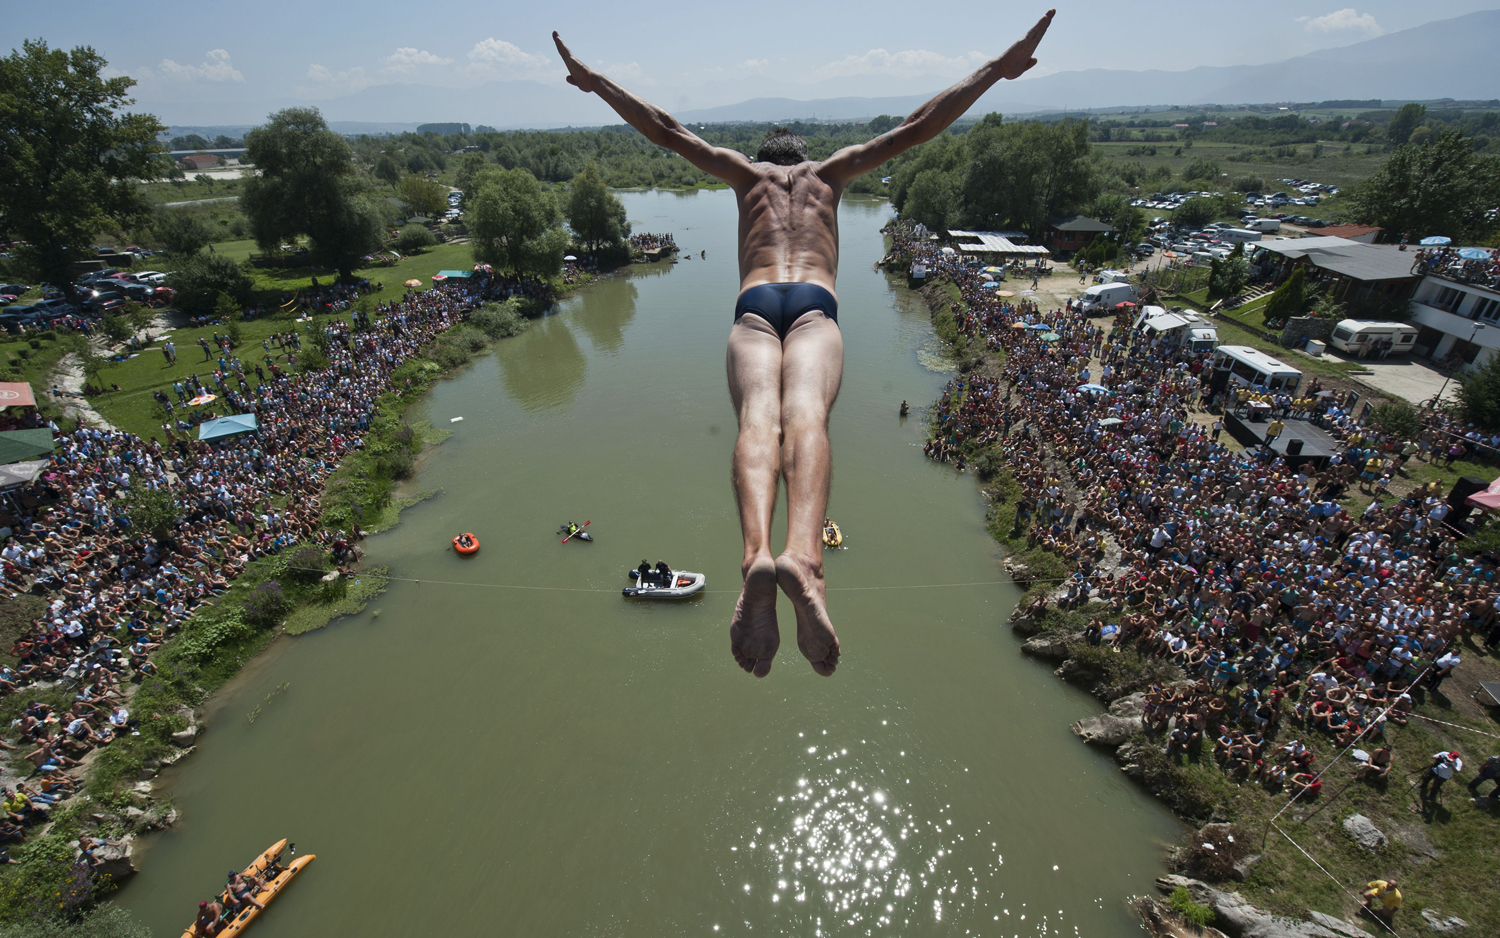 Aug. 10, 2014. Spectators watch as a diver Sali Riza Grancina performs the winning jump from the Ura e Shenjte bridge during the traditional annual high diving competition, near the town of Gjakova, Kosovo.